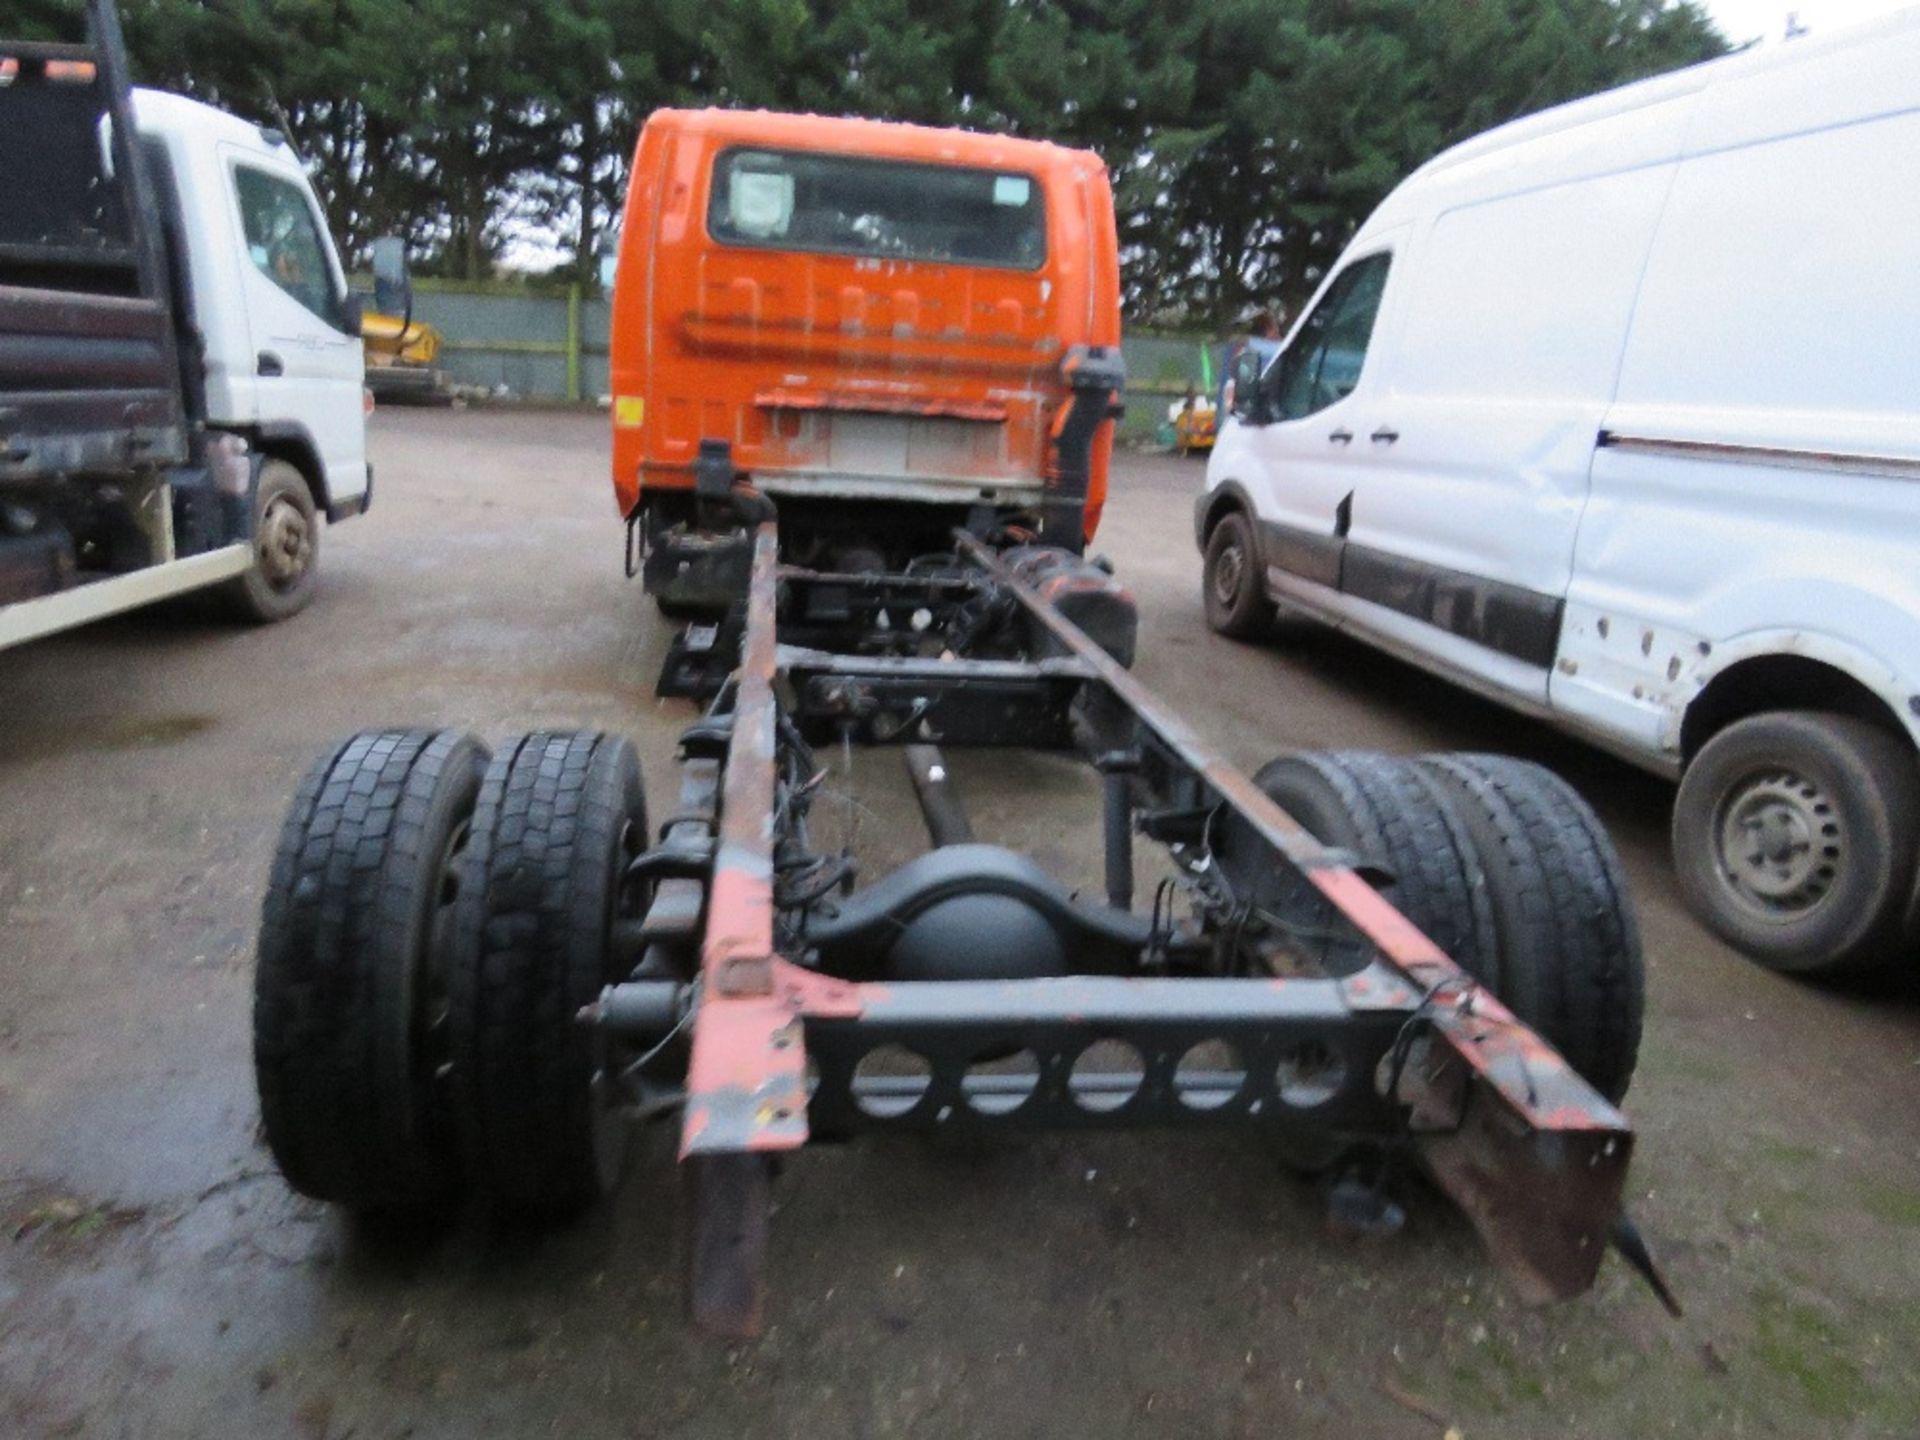 ISUZU DOUBLE CAB EASYSHIFT GEARBOX 7500KG RATED CHASSIS CAB LORRY. REG KE57 CZH. 12FT LENGTH OF CHAS - Image 6 of 9